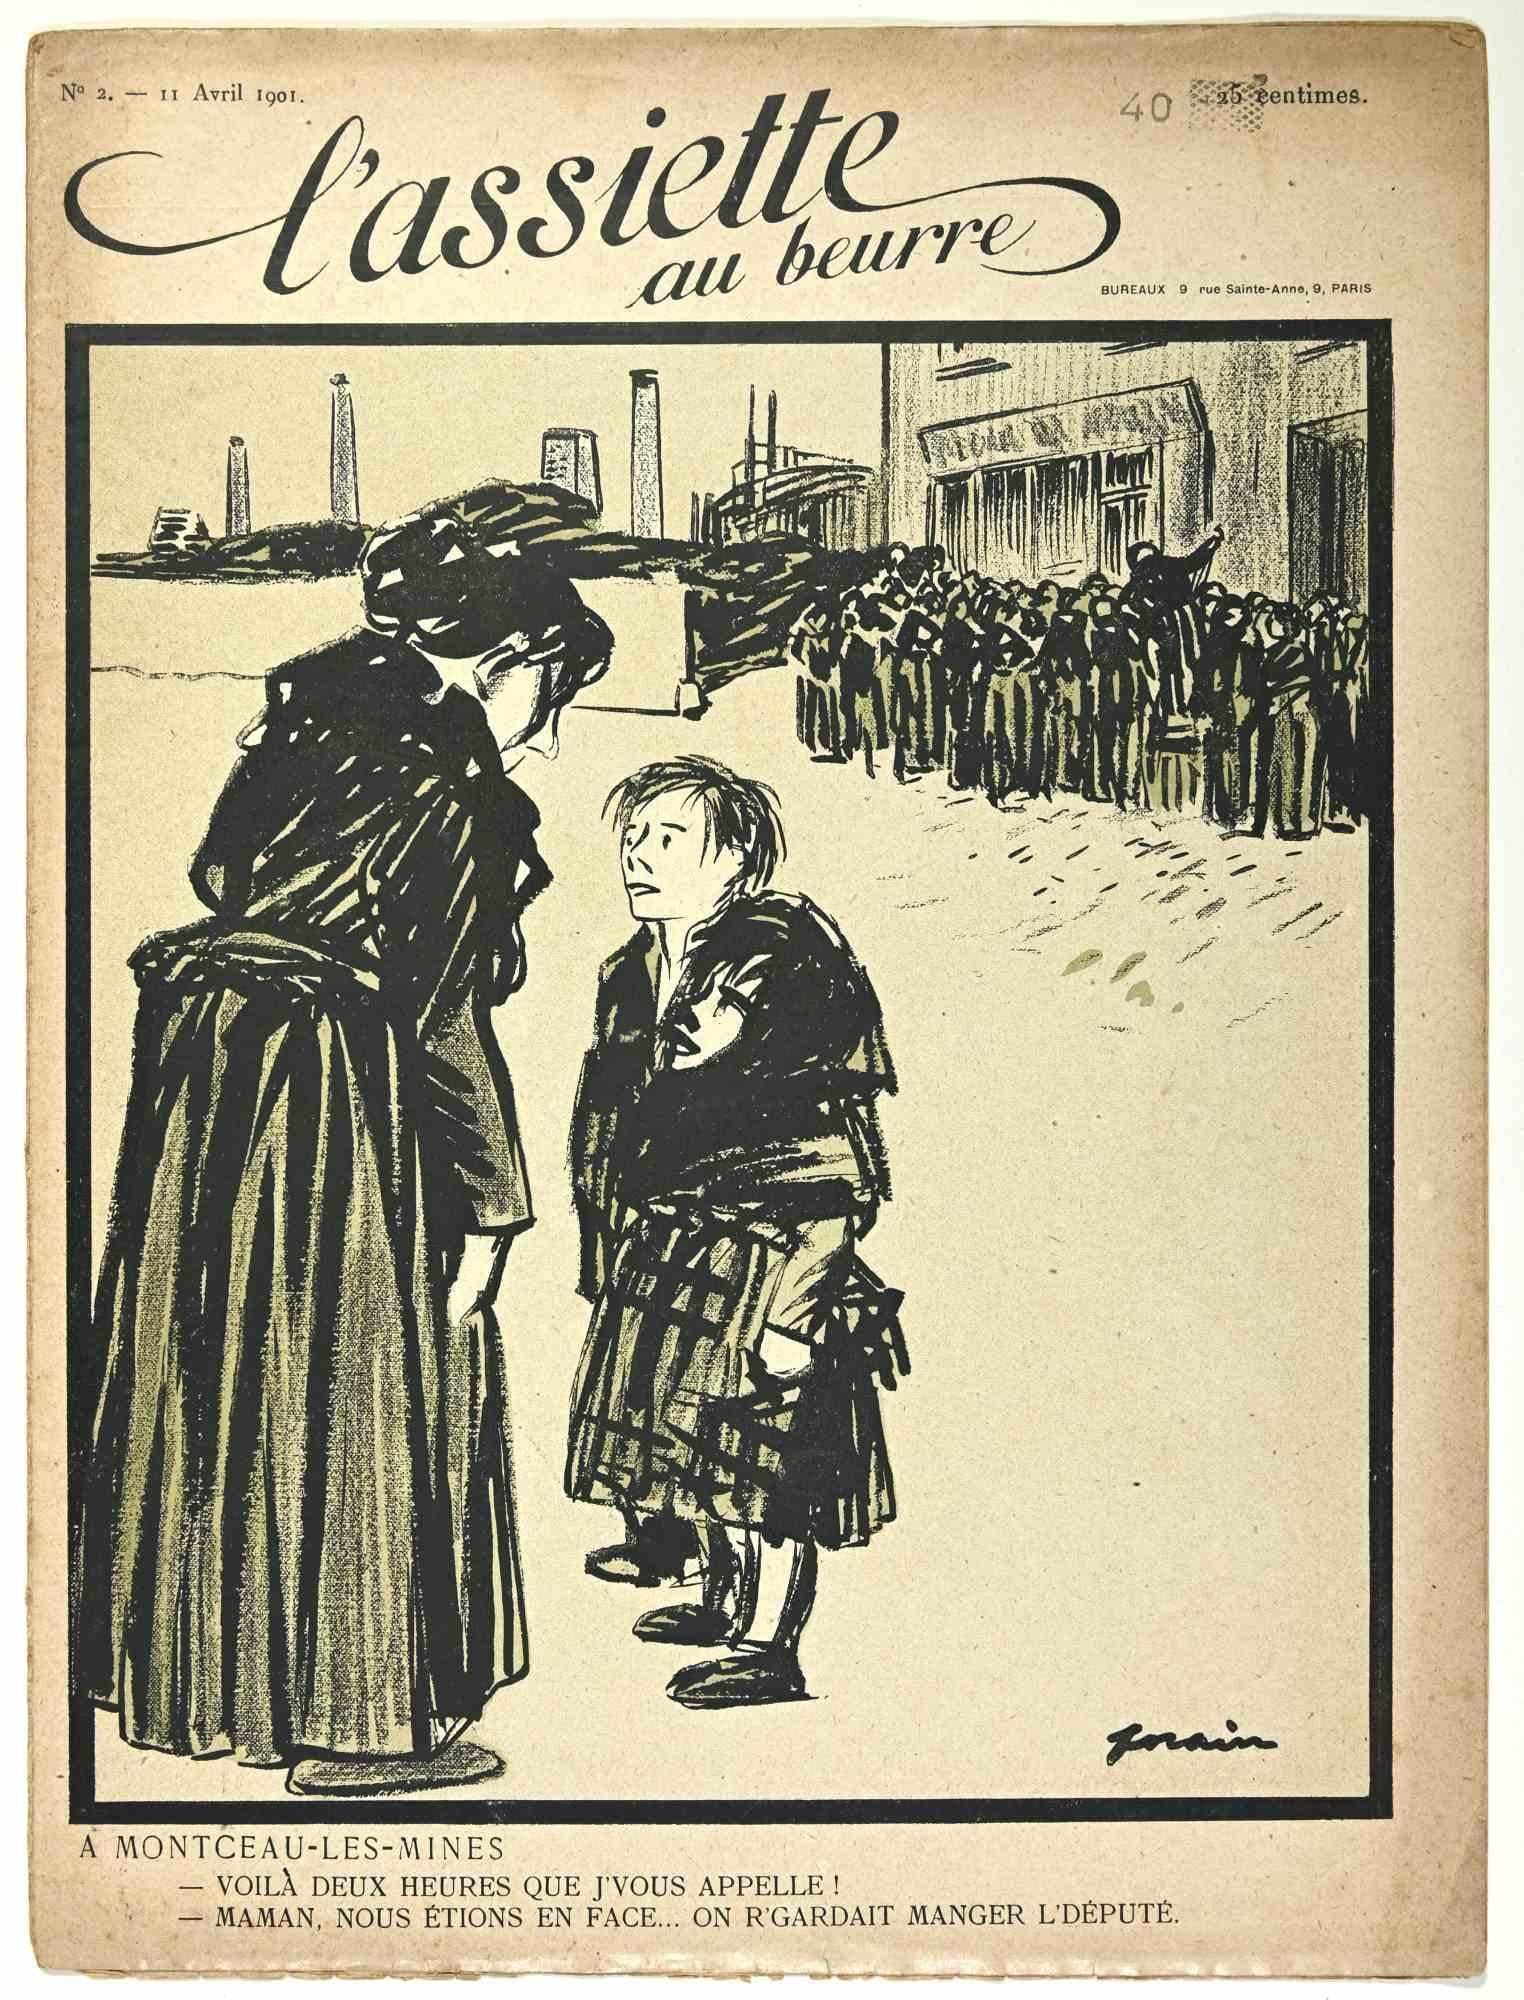 L'Assiette au Beurre is a Comic Magazine stamped on April 1901, drawing by Jean Luis Forain.

Good condition on a yellowed paper, except for some torn paper on the left margin.

Signed, numbered and dated on the margins.